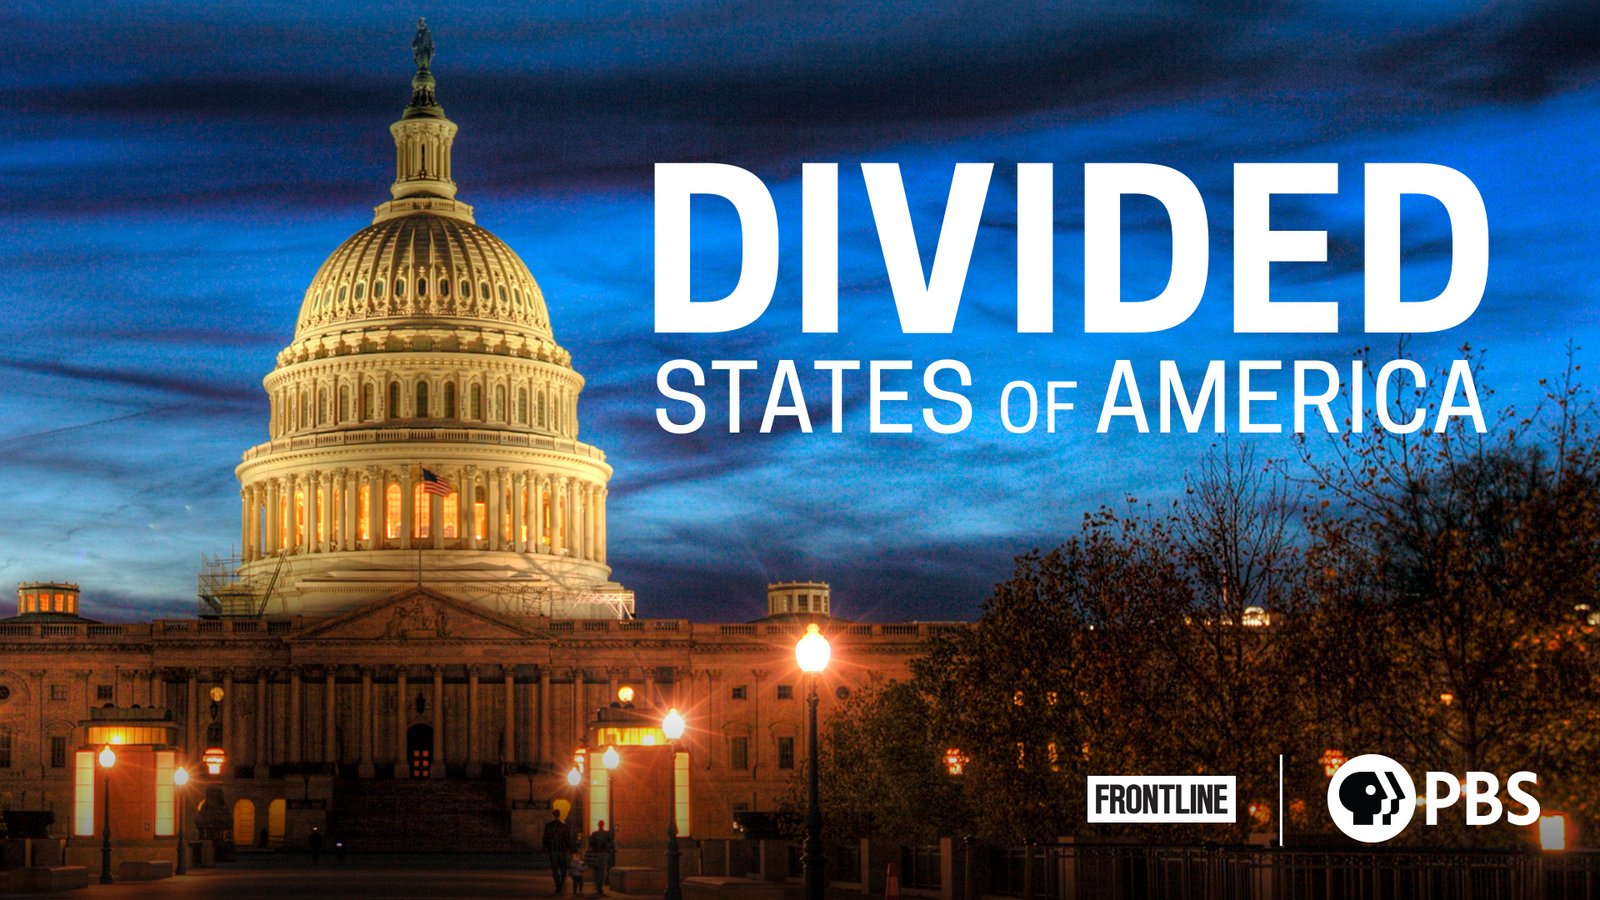 Frontline: Divided States of America - From the Obama Administration to Trump